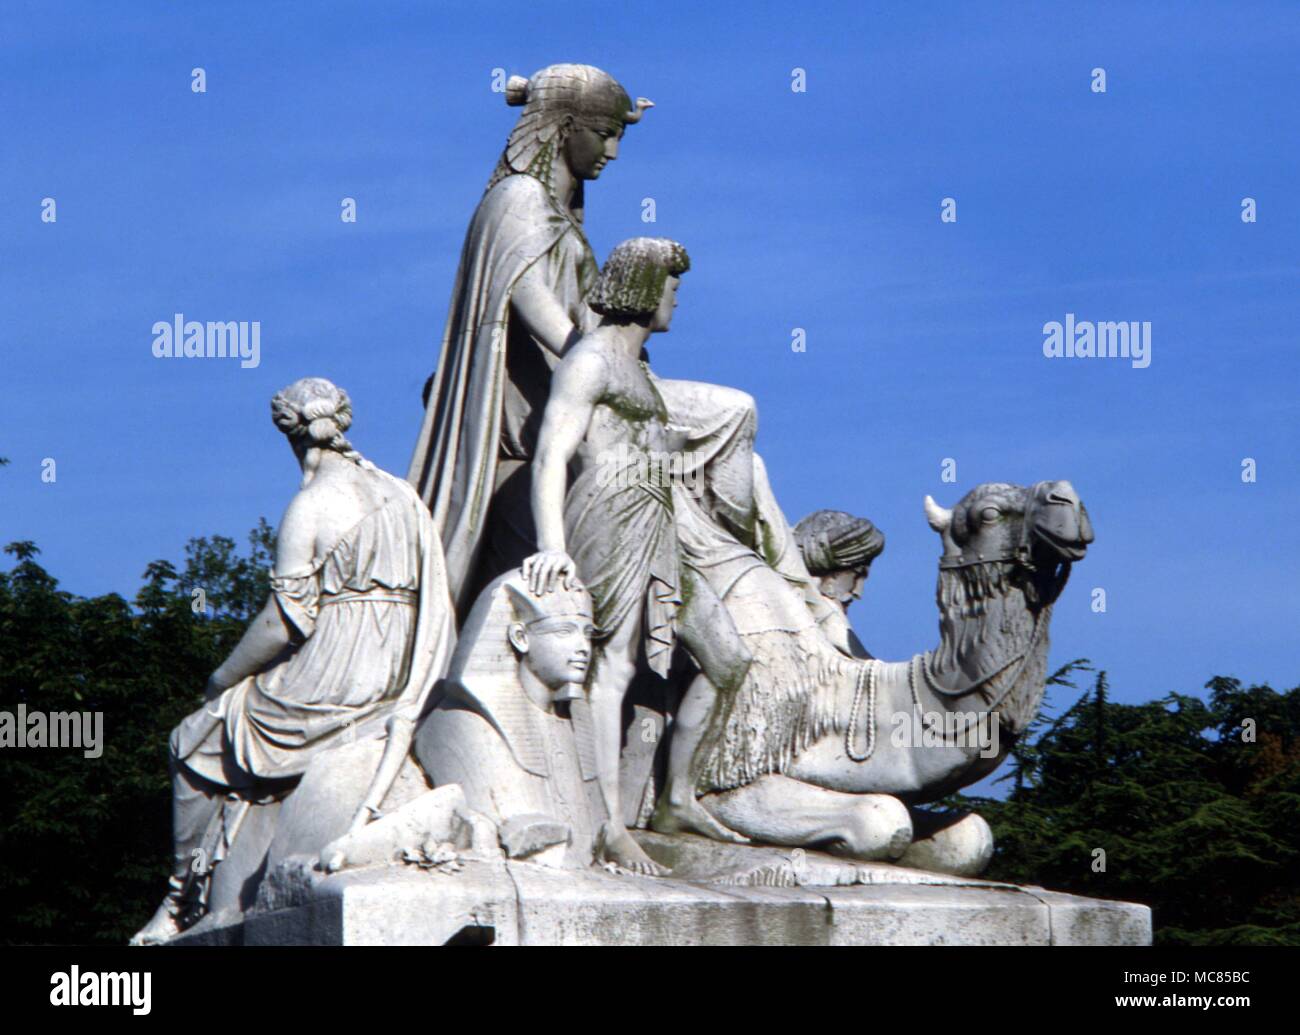 Statue of camel and various oriental figures, including a sphinx, intended to symbolize the Egyptian and Middle Eastern dependencies, on the Albert Memorial, Kensington Gardens. Stock Photo